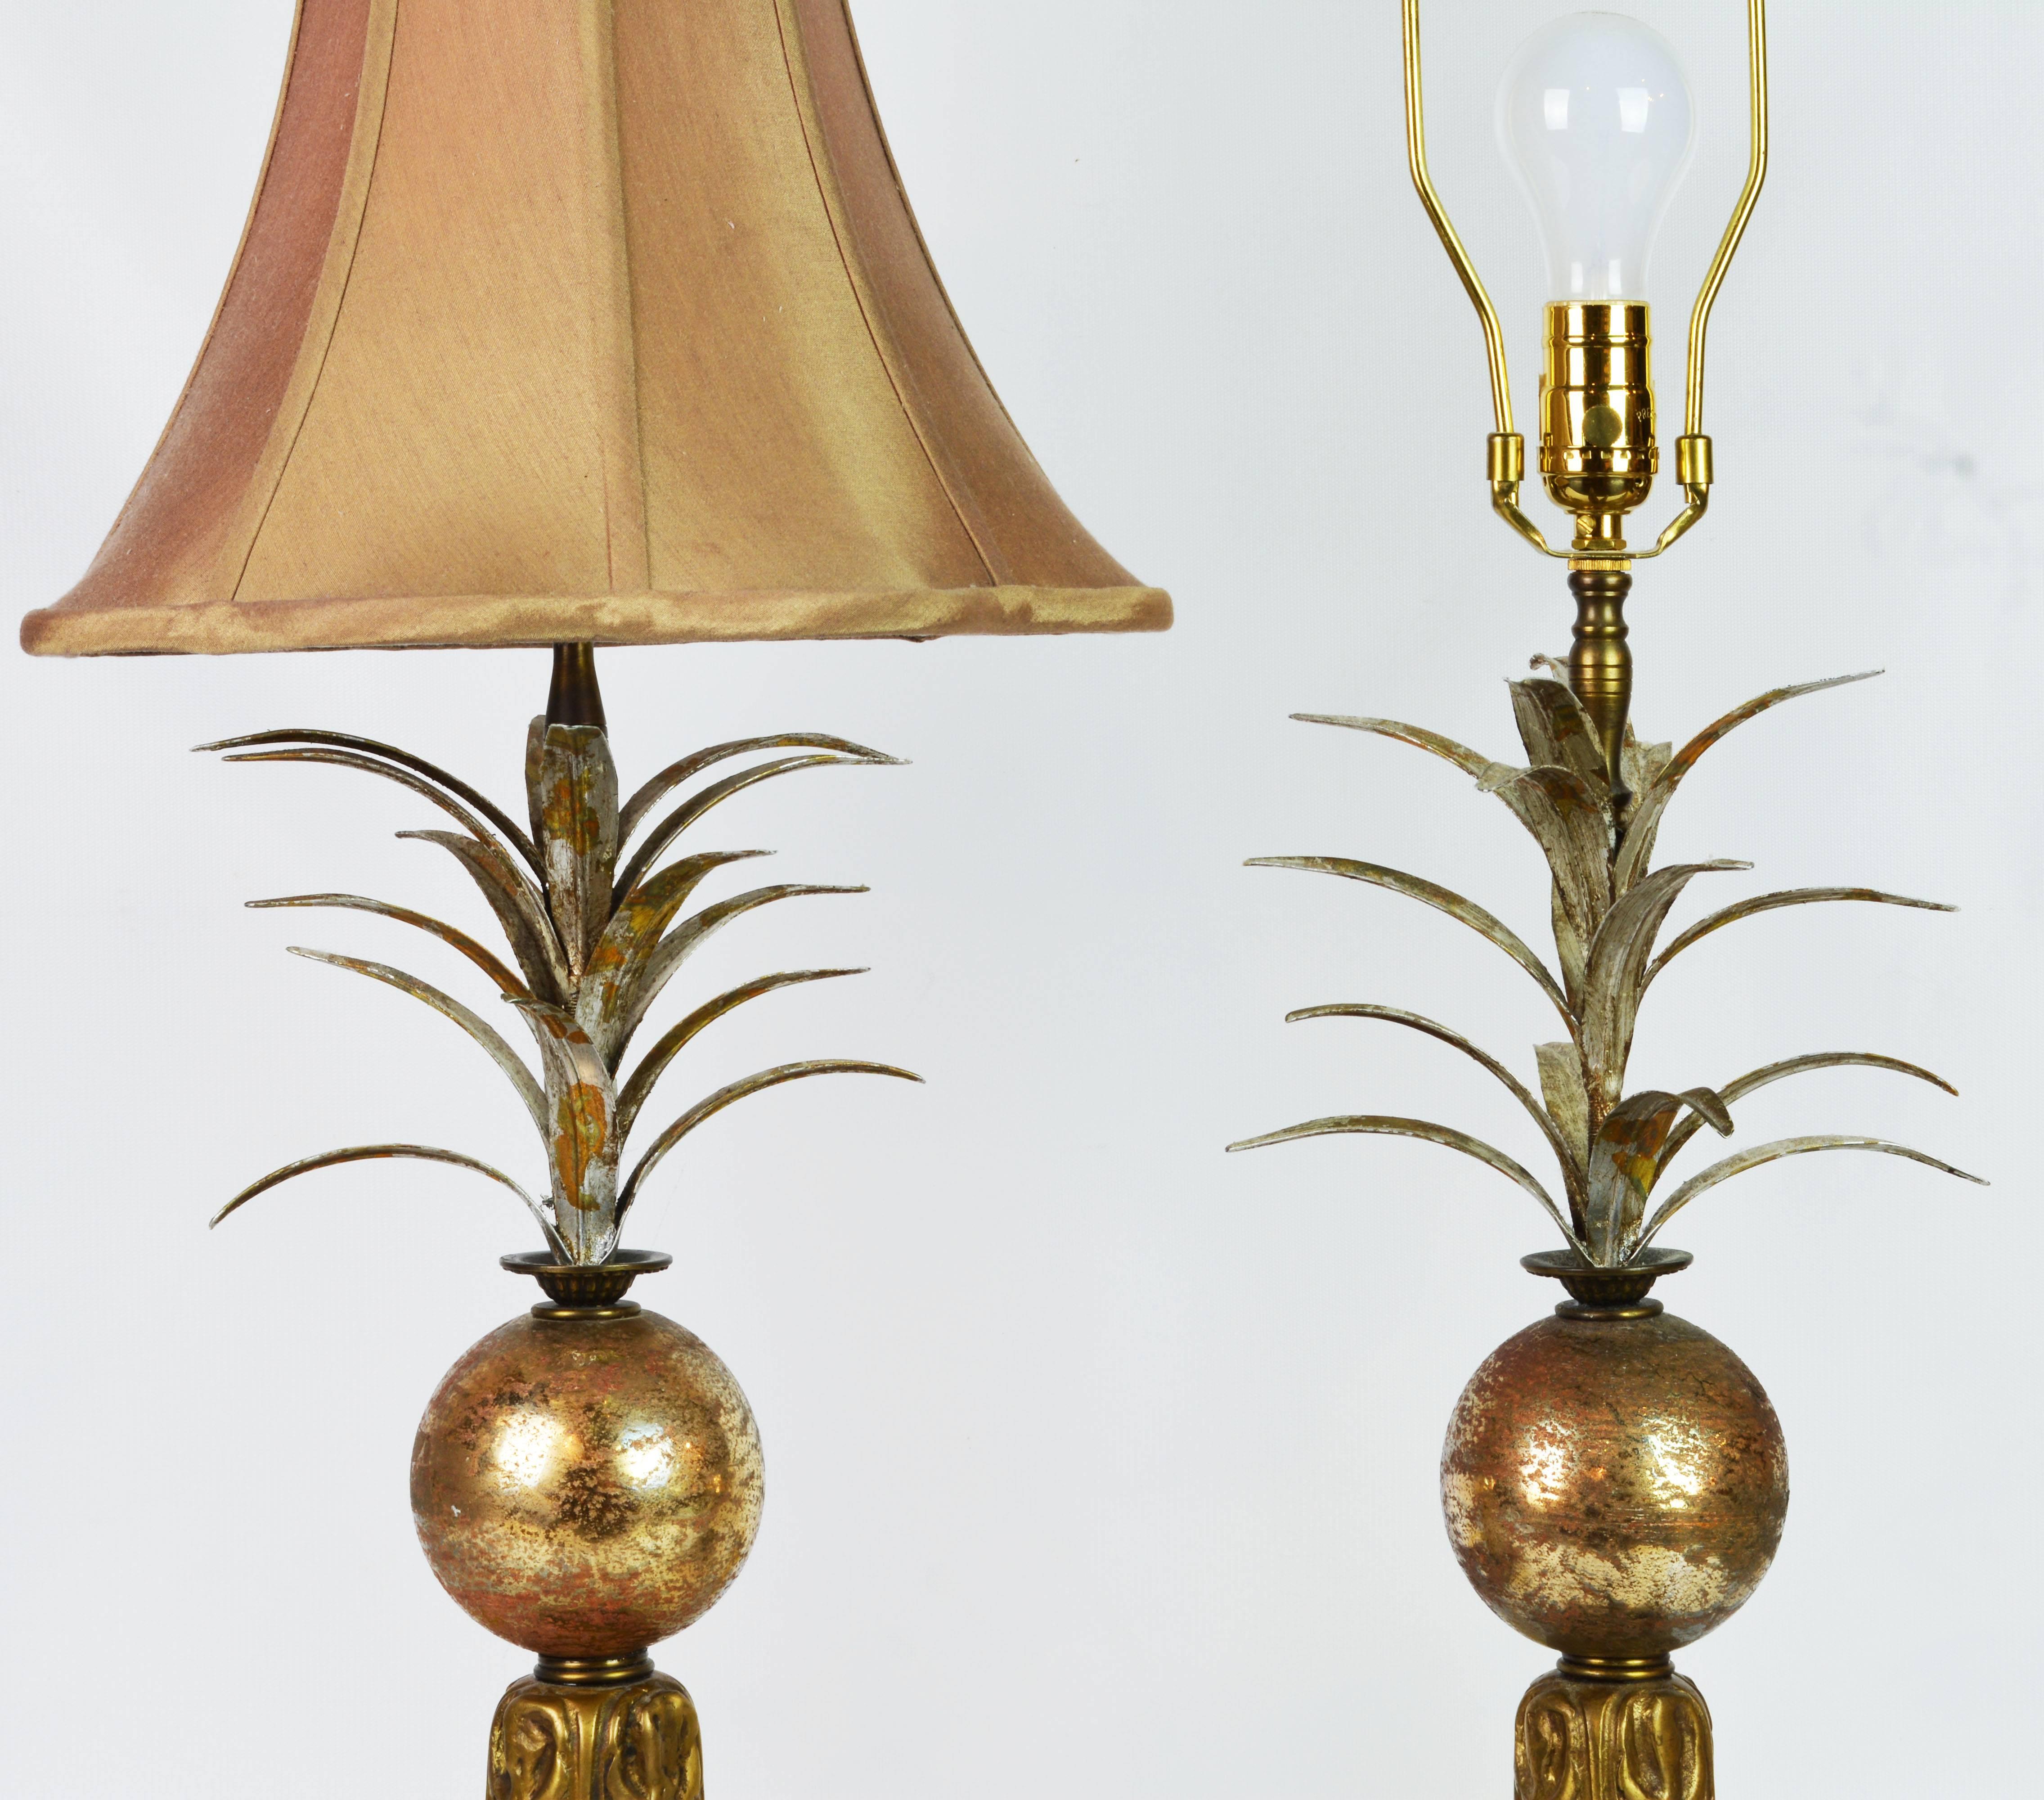 Pair of Vintage Tropical Themed Distressed Gilt Table Lamps by John Richard 1